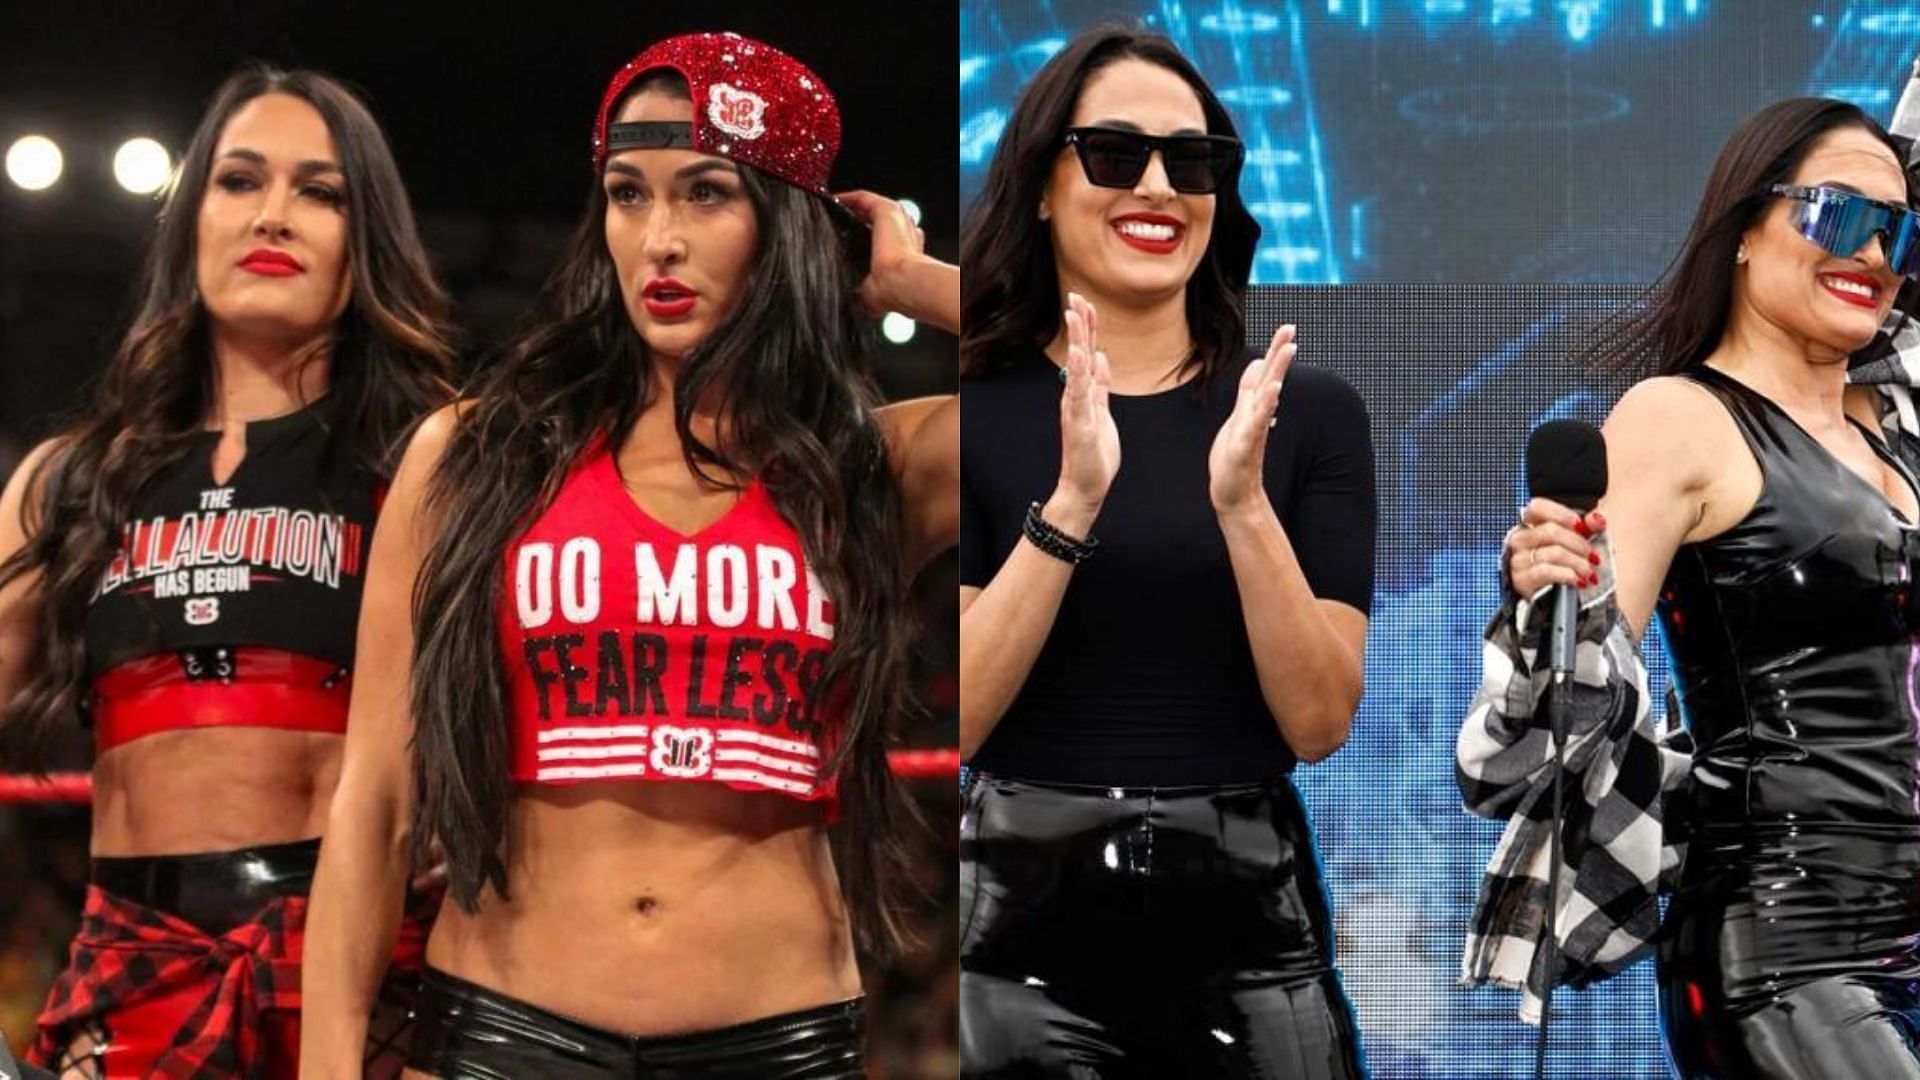 Nikki Bella on WWE in-ring return: We'll see what the man